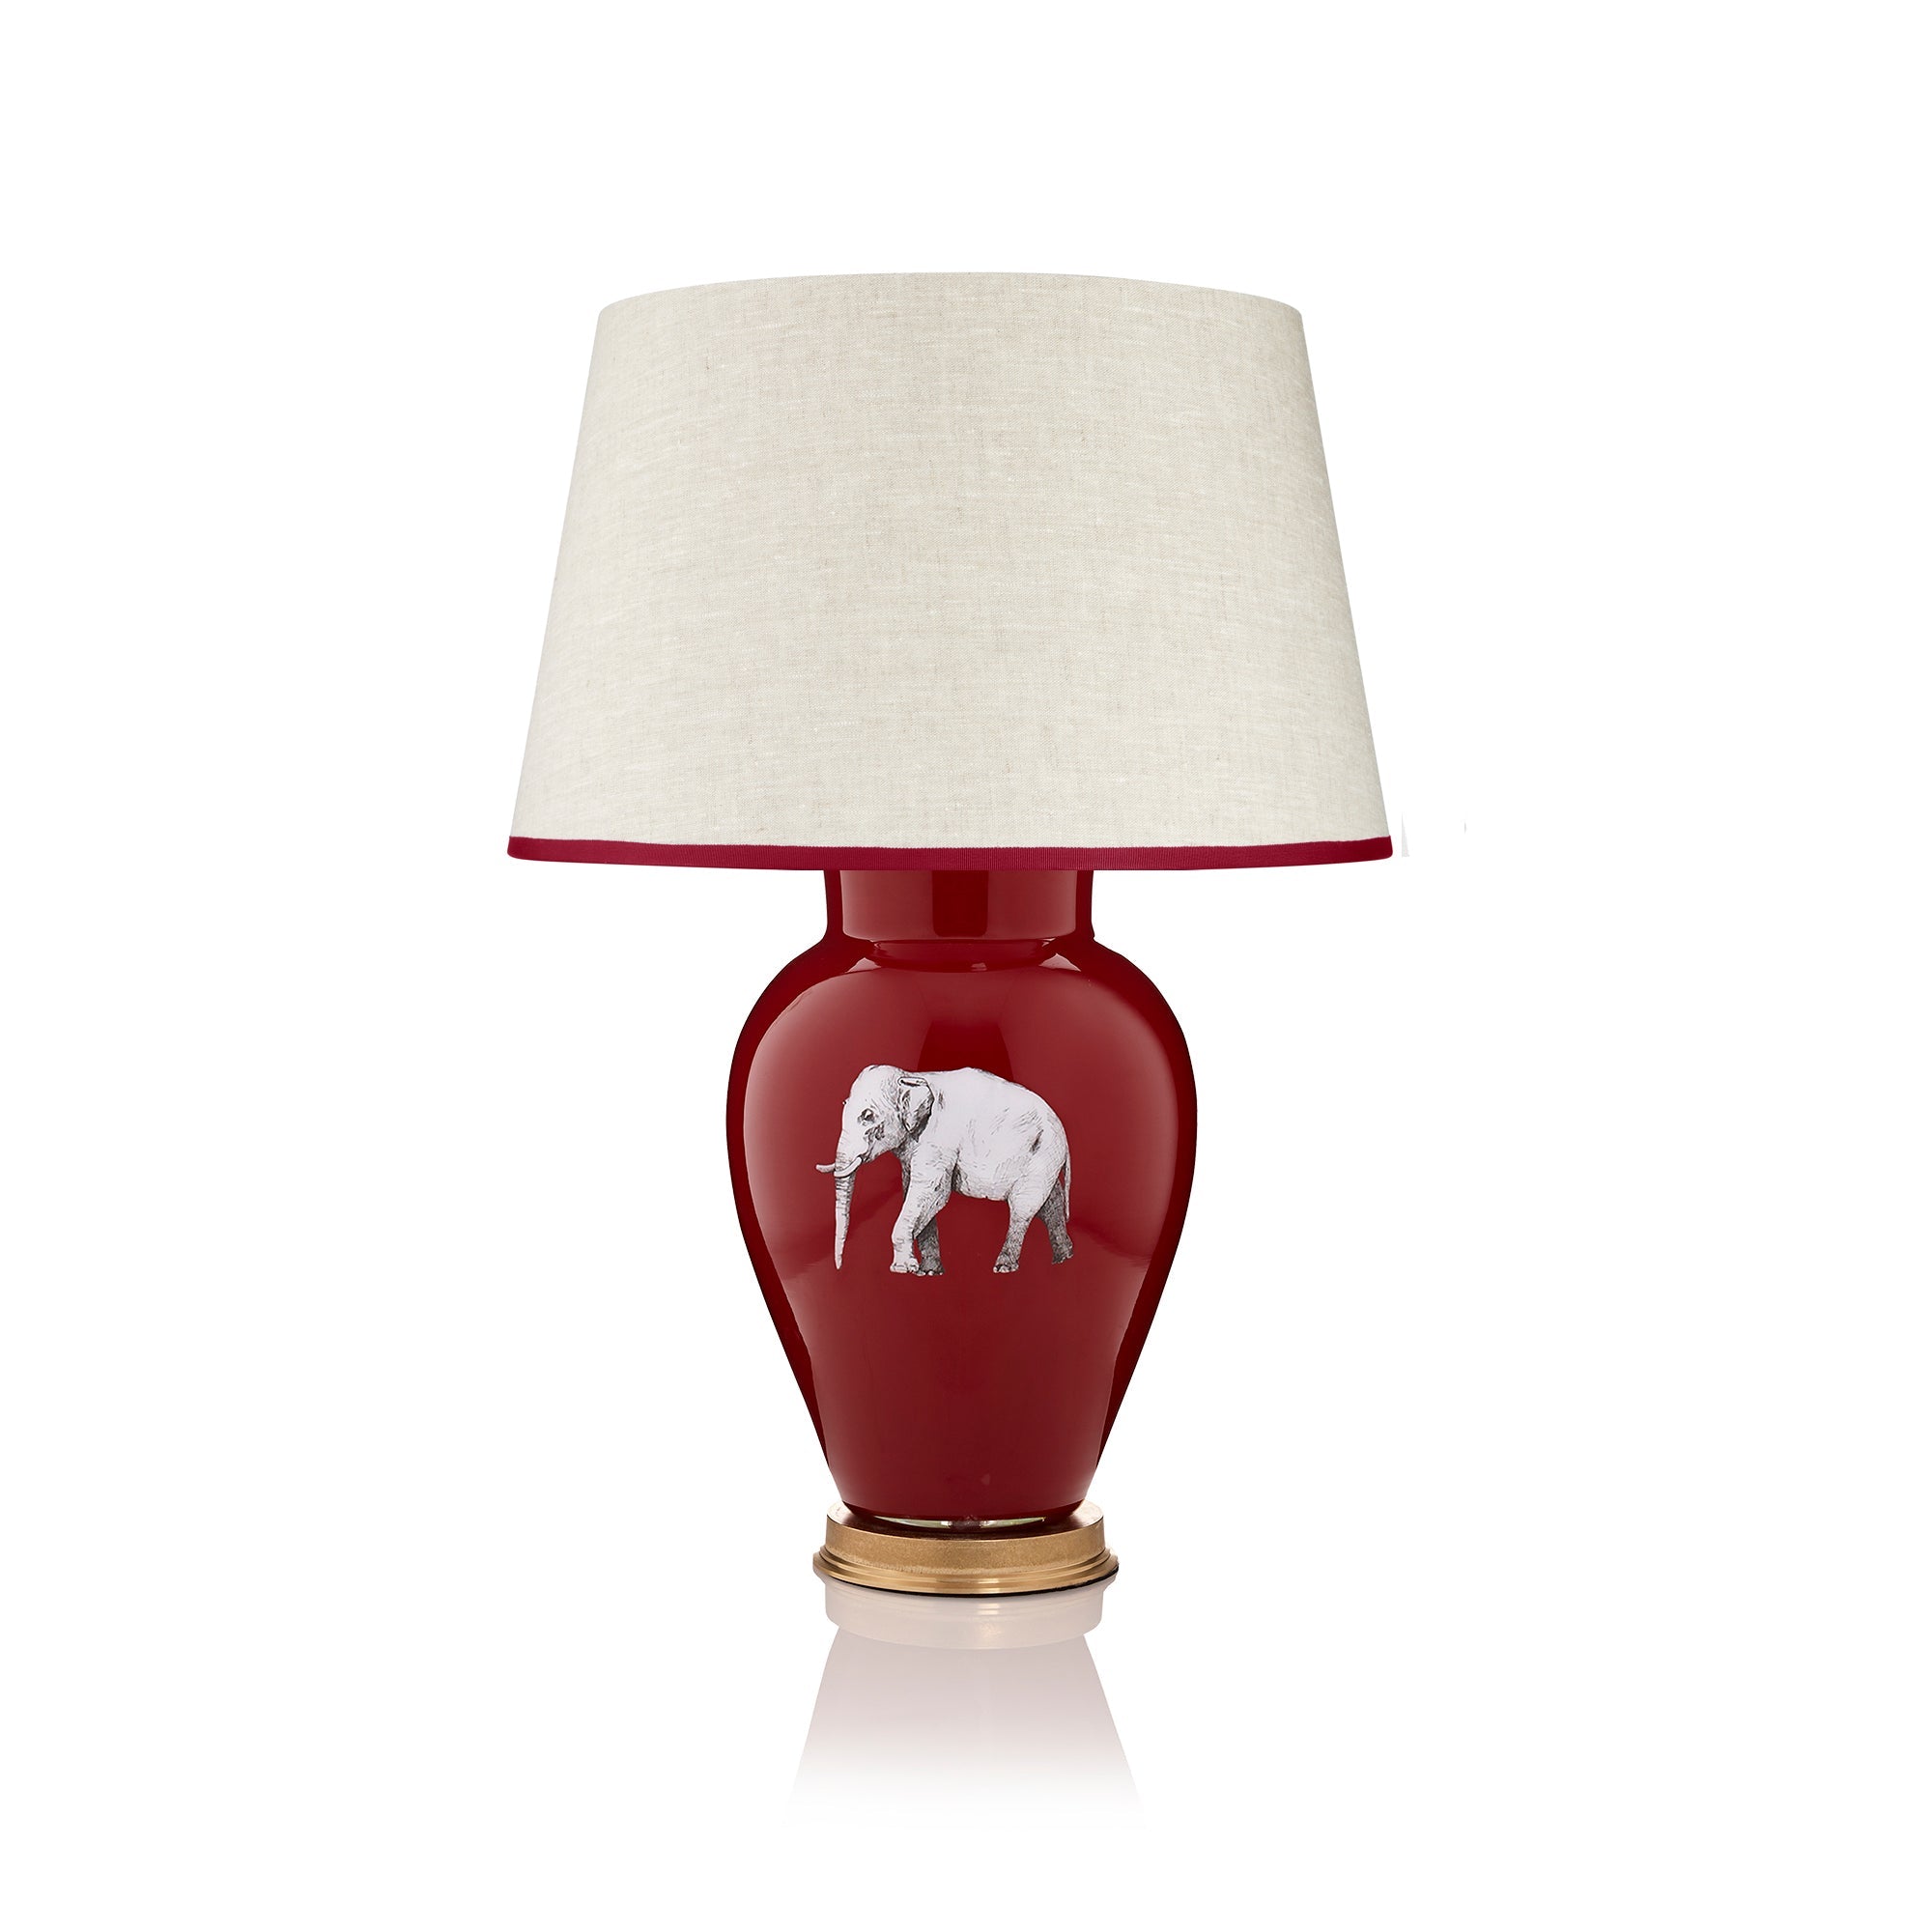 ELEPHANT IN THE ROOM LAMP BASE IN LARGE